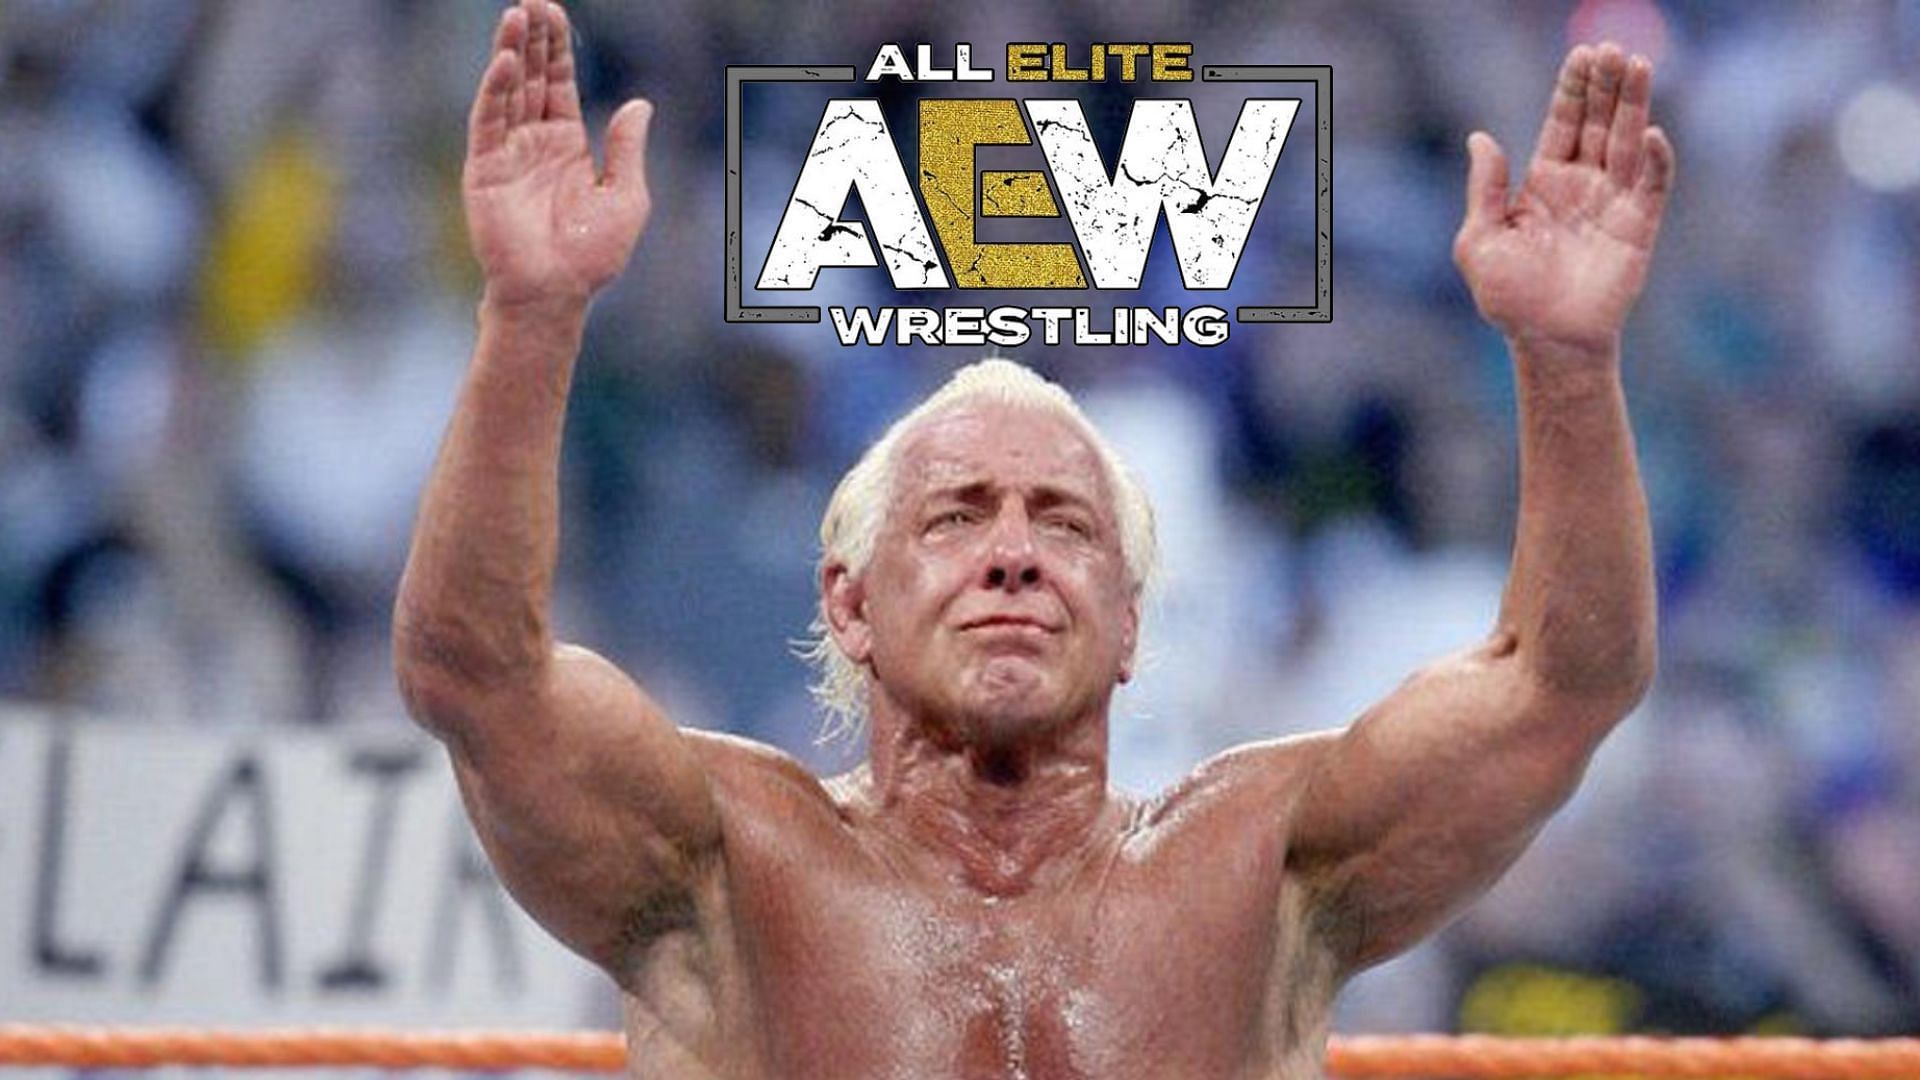 WWE legend Ric Flair and this AEW star shared the ring so many times.